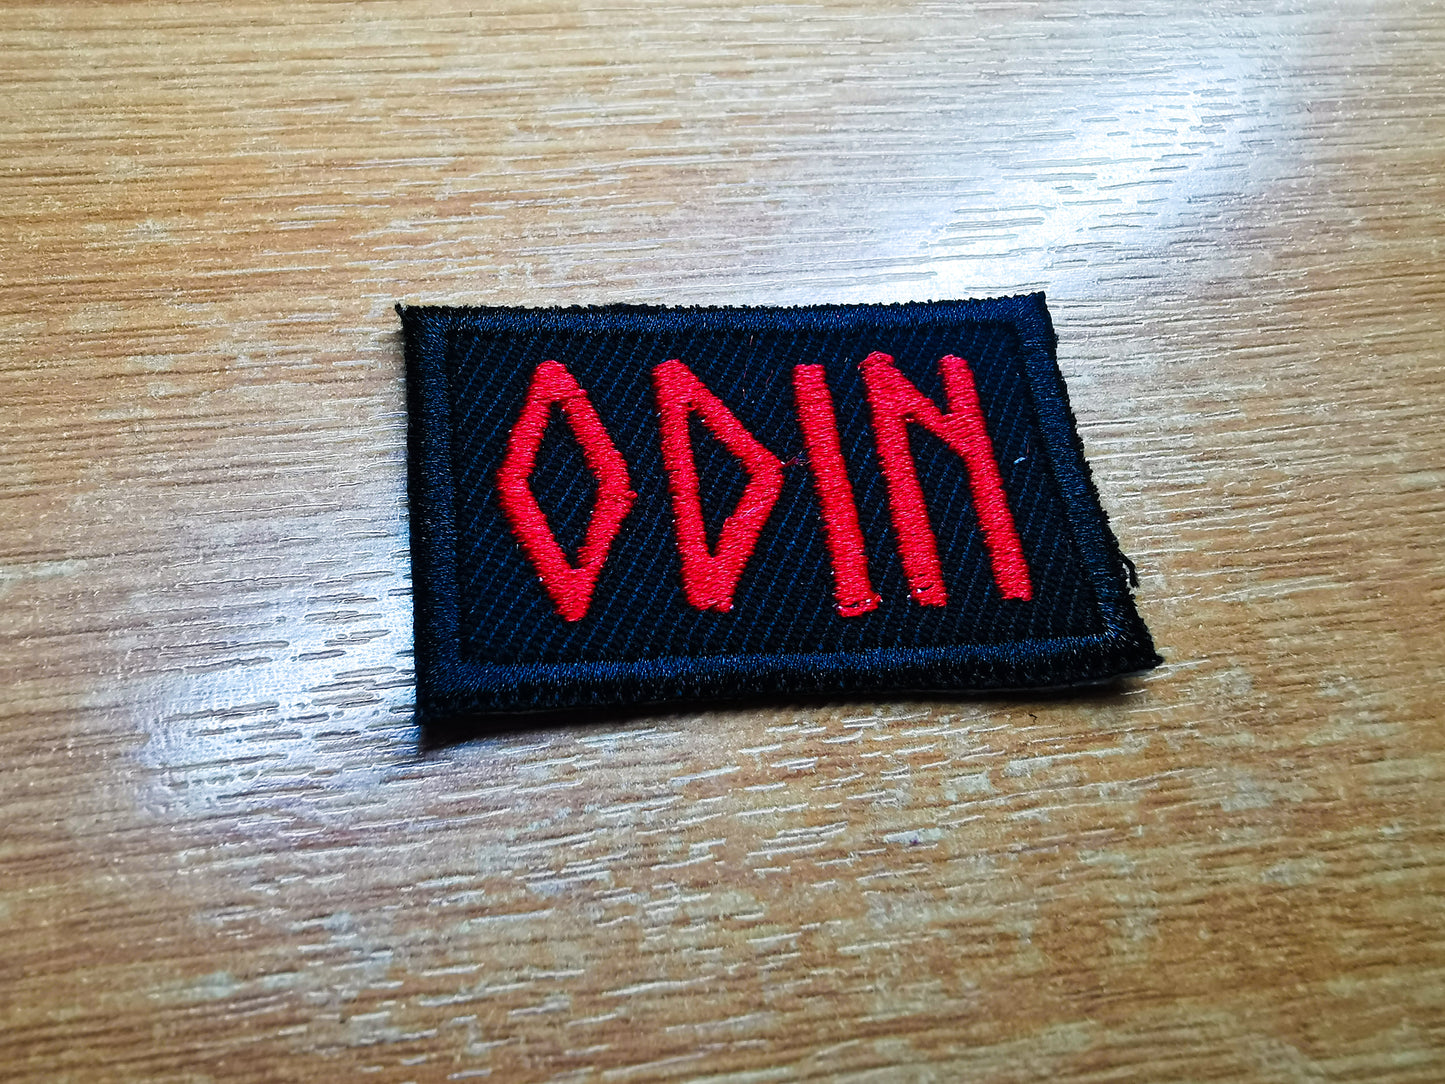 Odin Vikings Rune Red Embroidered Patch Vikings Gift